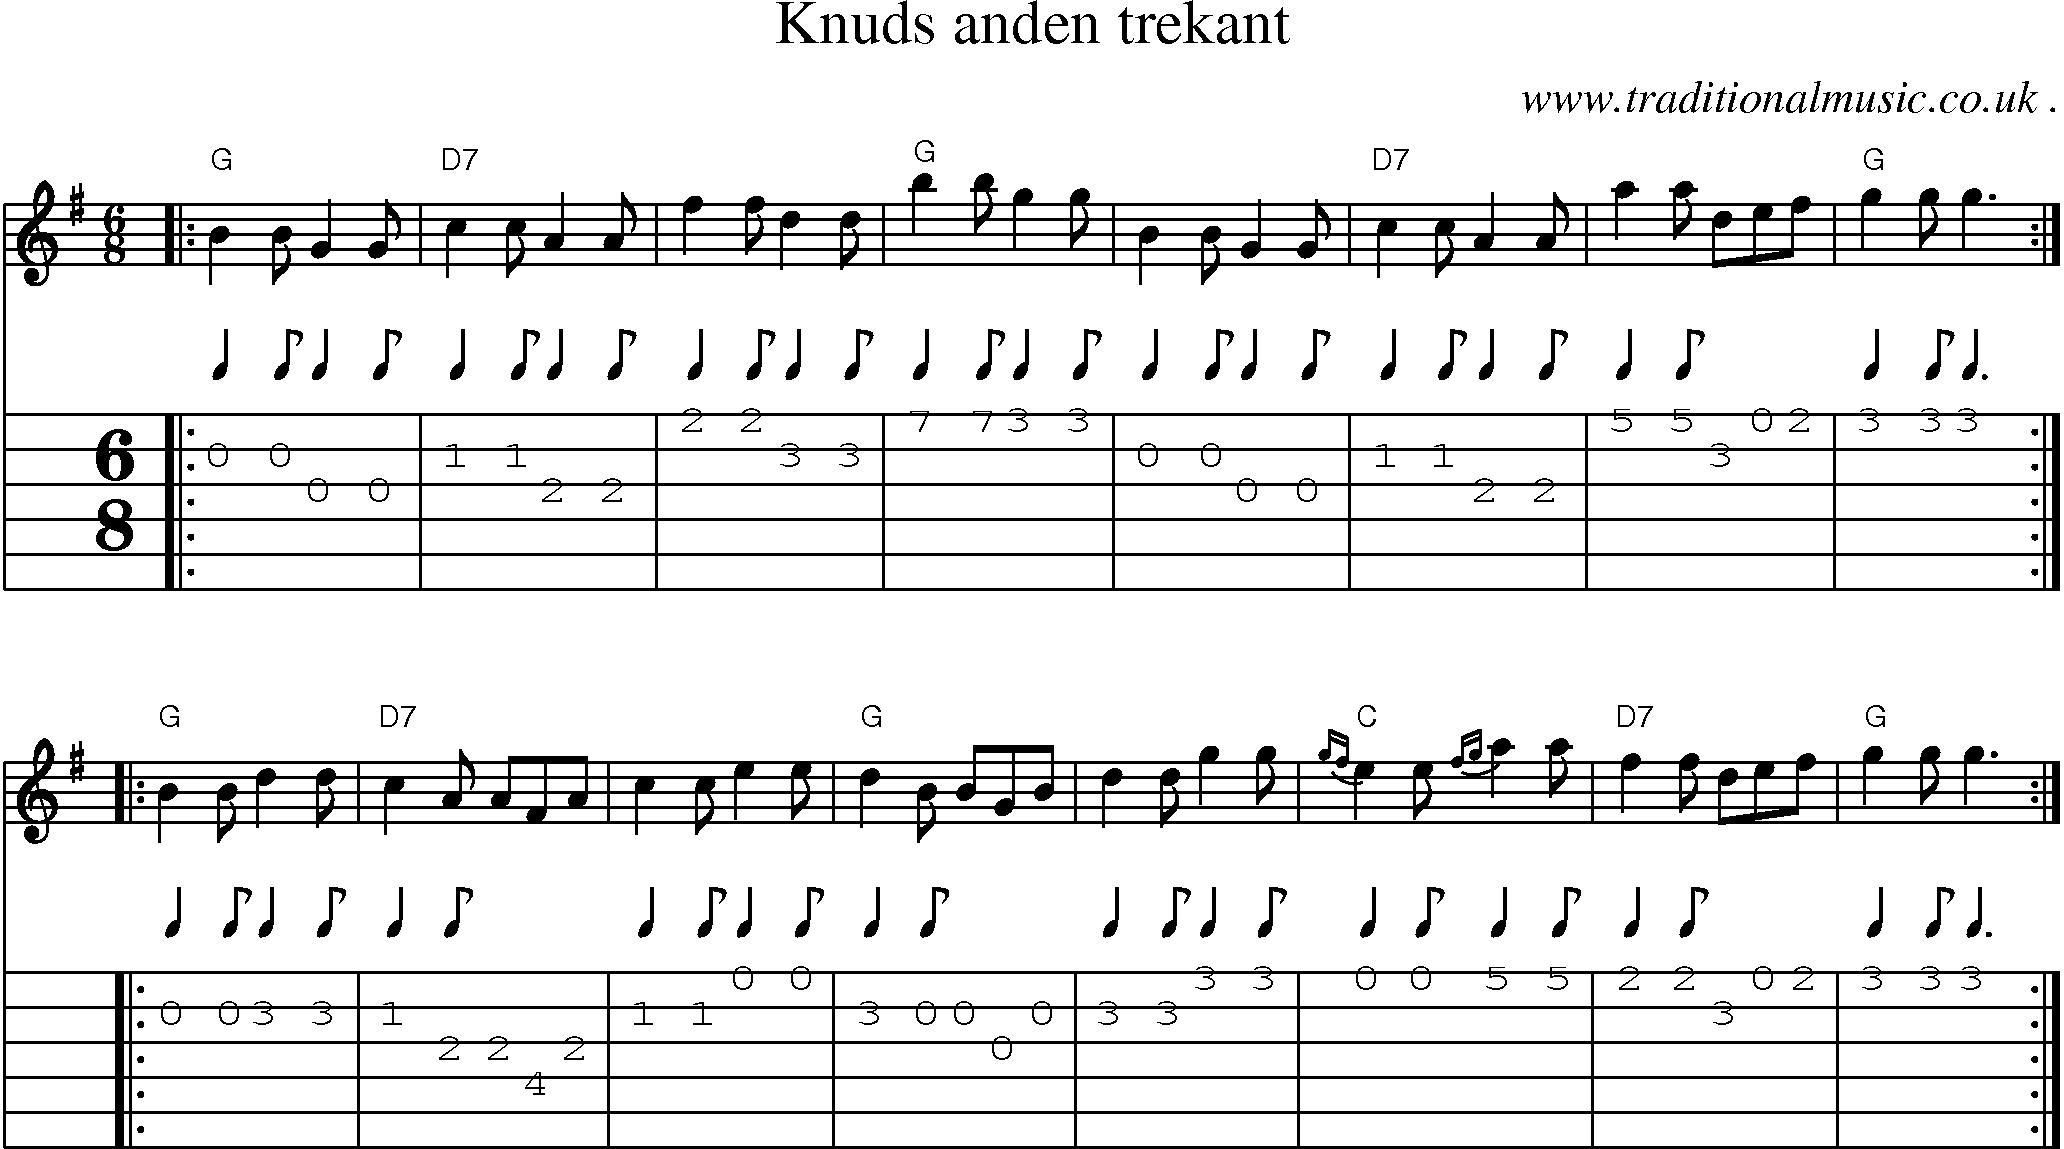 Sheet-music  score, Chords and Guitar Tabs for Knuds Anden Trekant